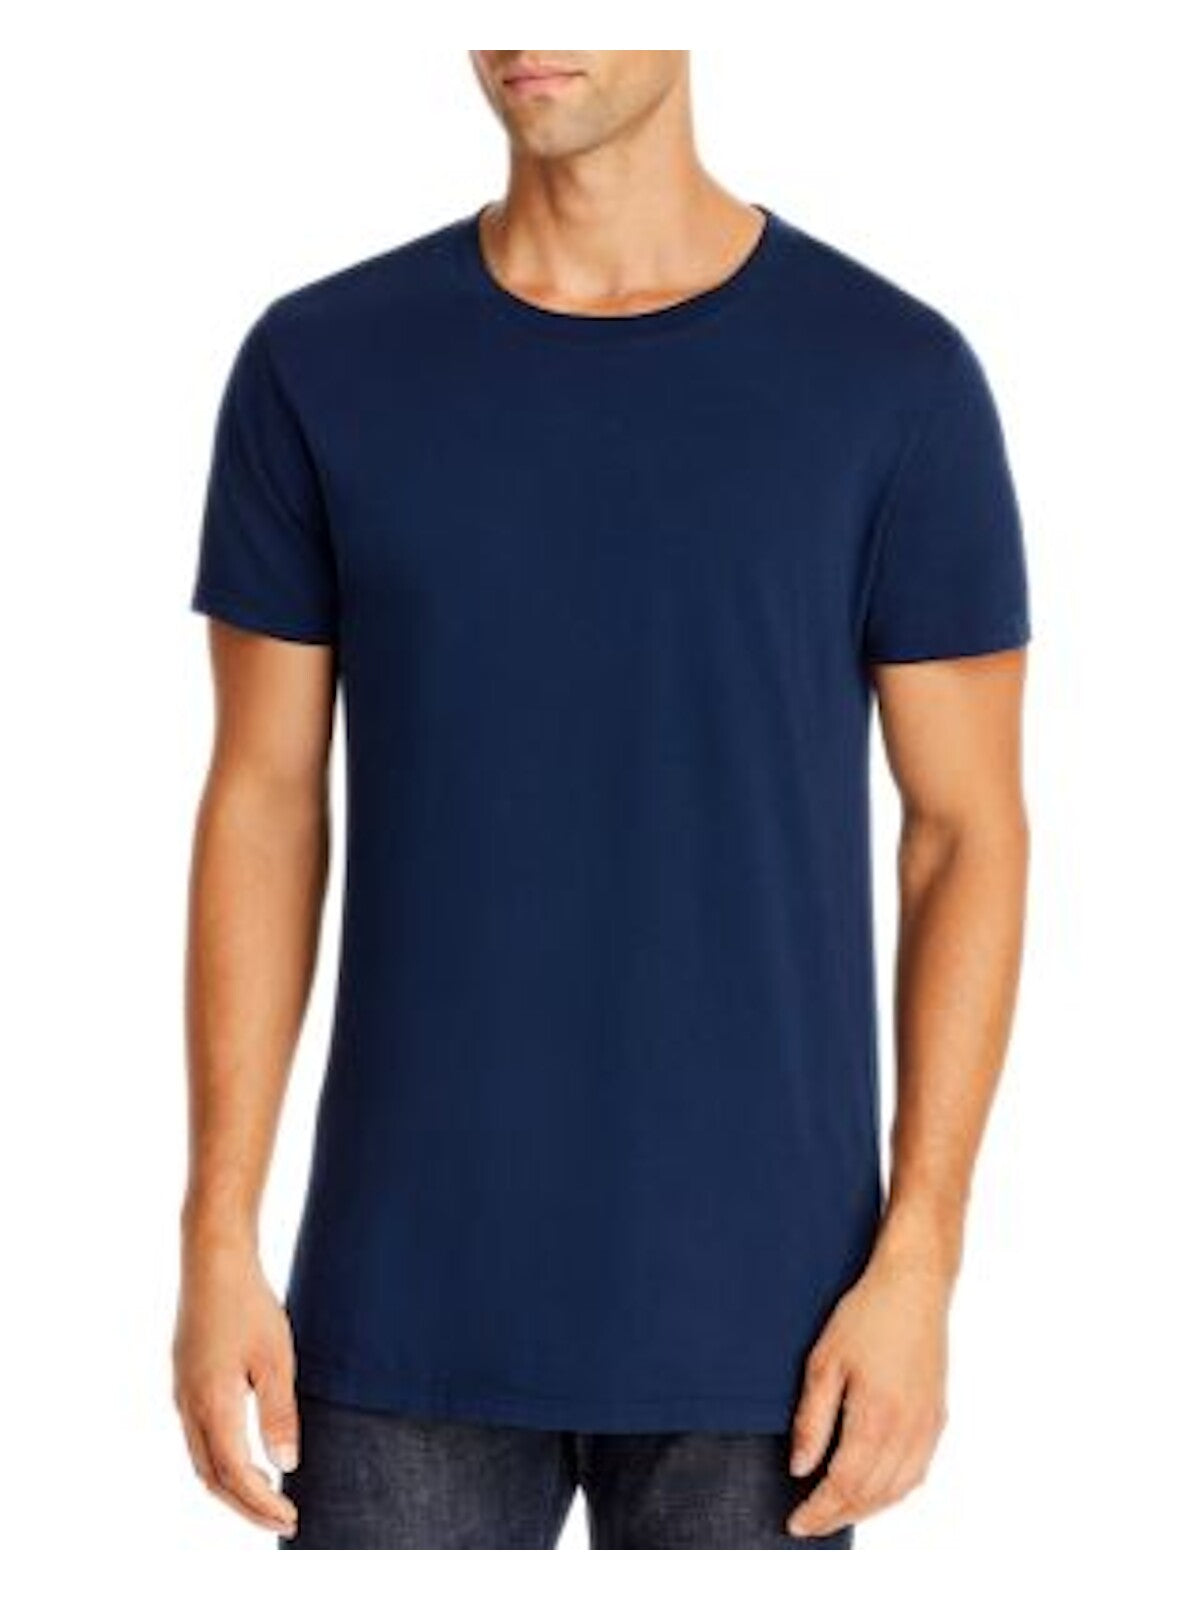 Pacific and Park Mens Navy Classic Fit T-Shirt L